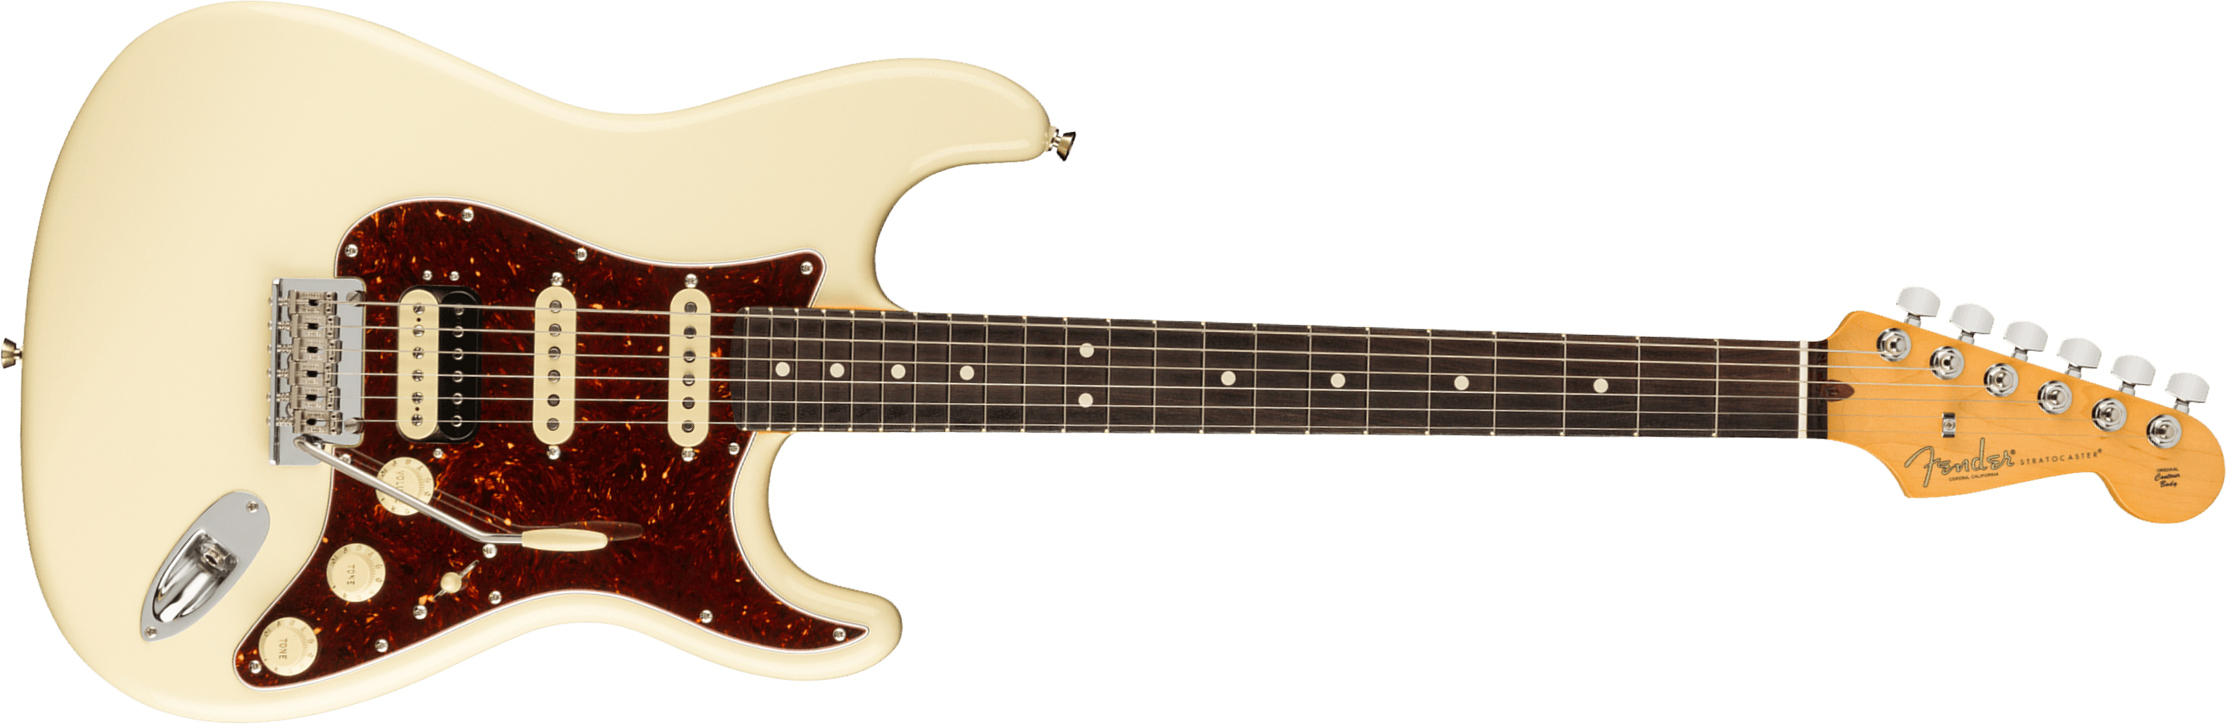 Fender Strat American Professional Ii Hss Usa Rw - Olympic White - Str shape electric guitar - Main picture